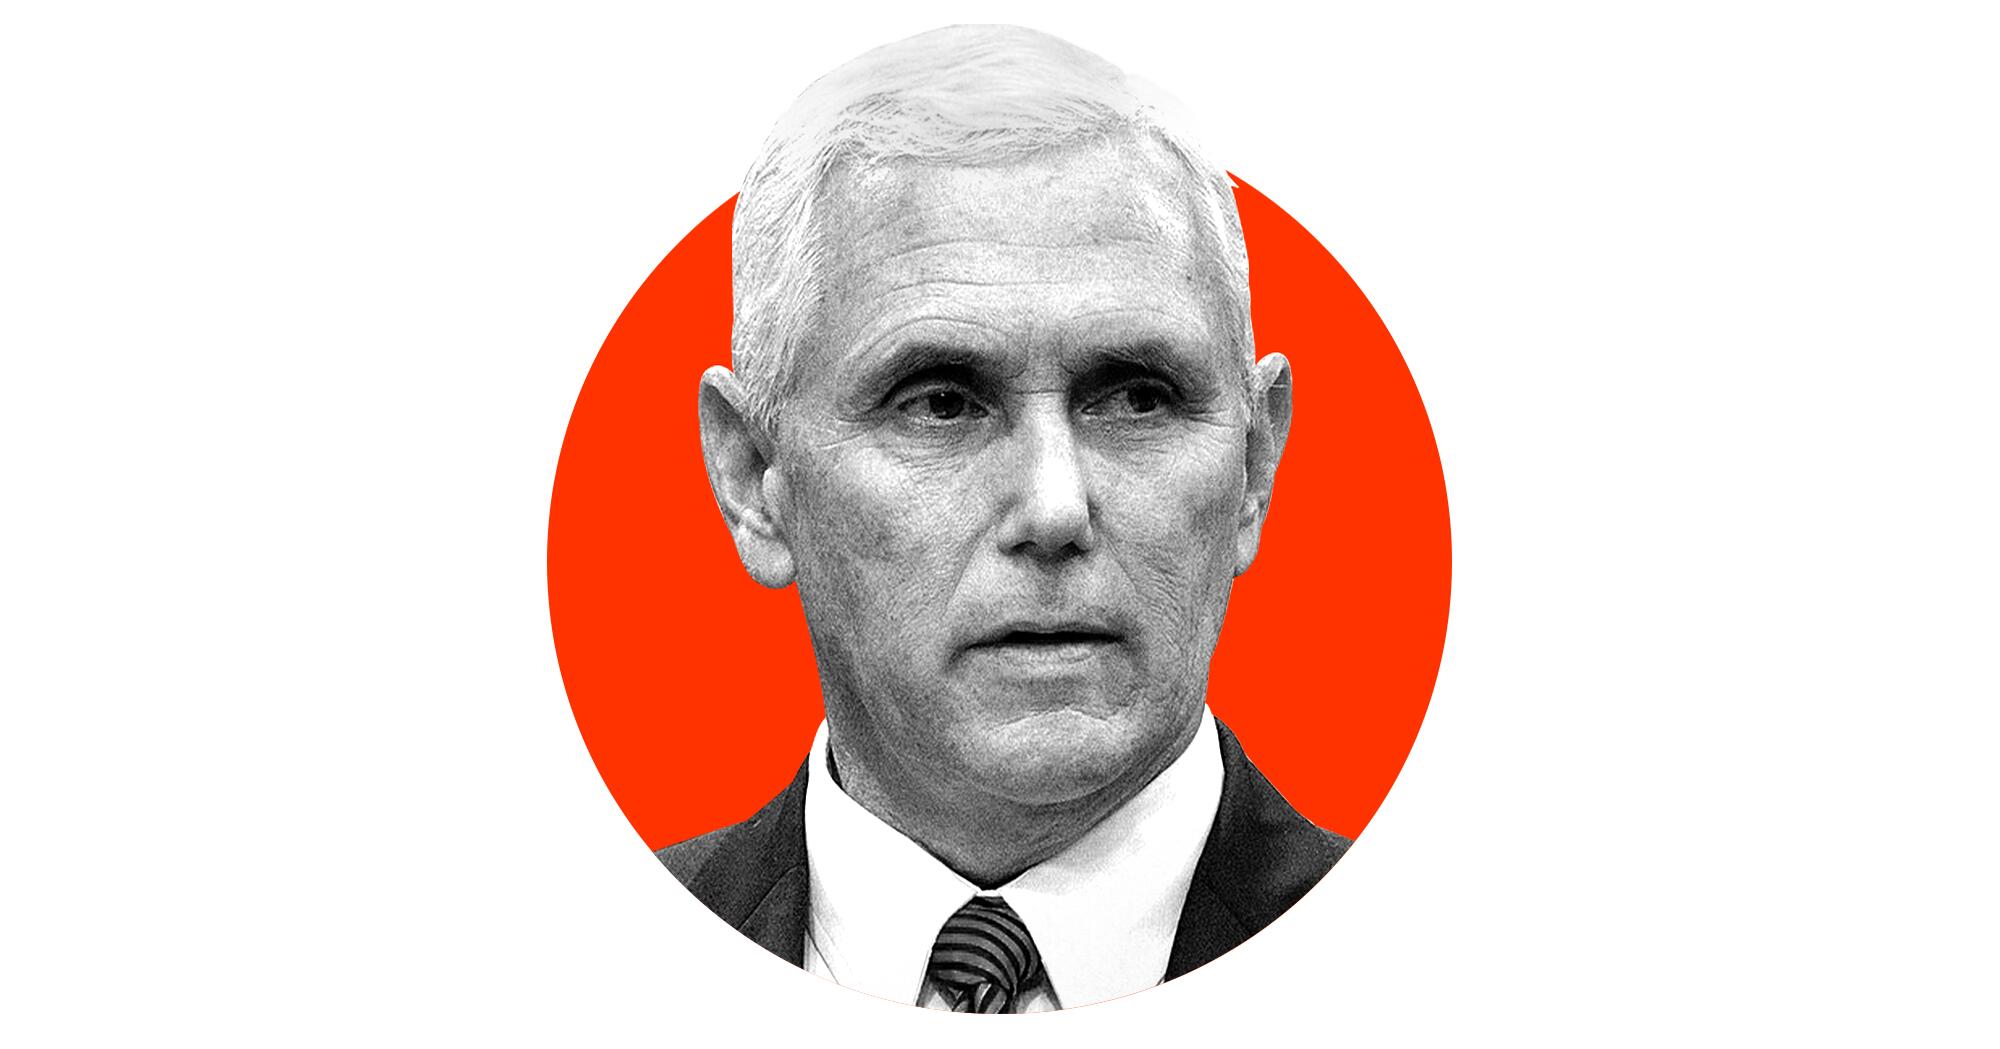 A photo illustration of a black-and-white headshot of former Vice President Mike Pence emerging from a red circle